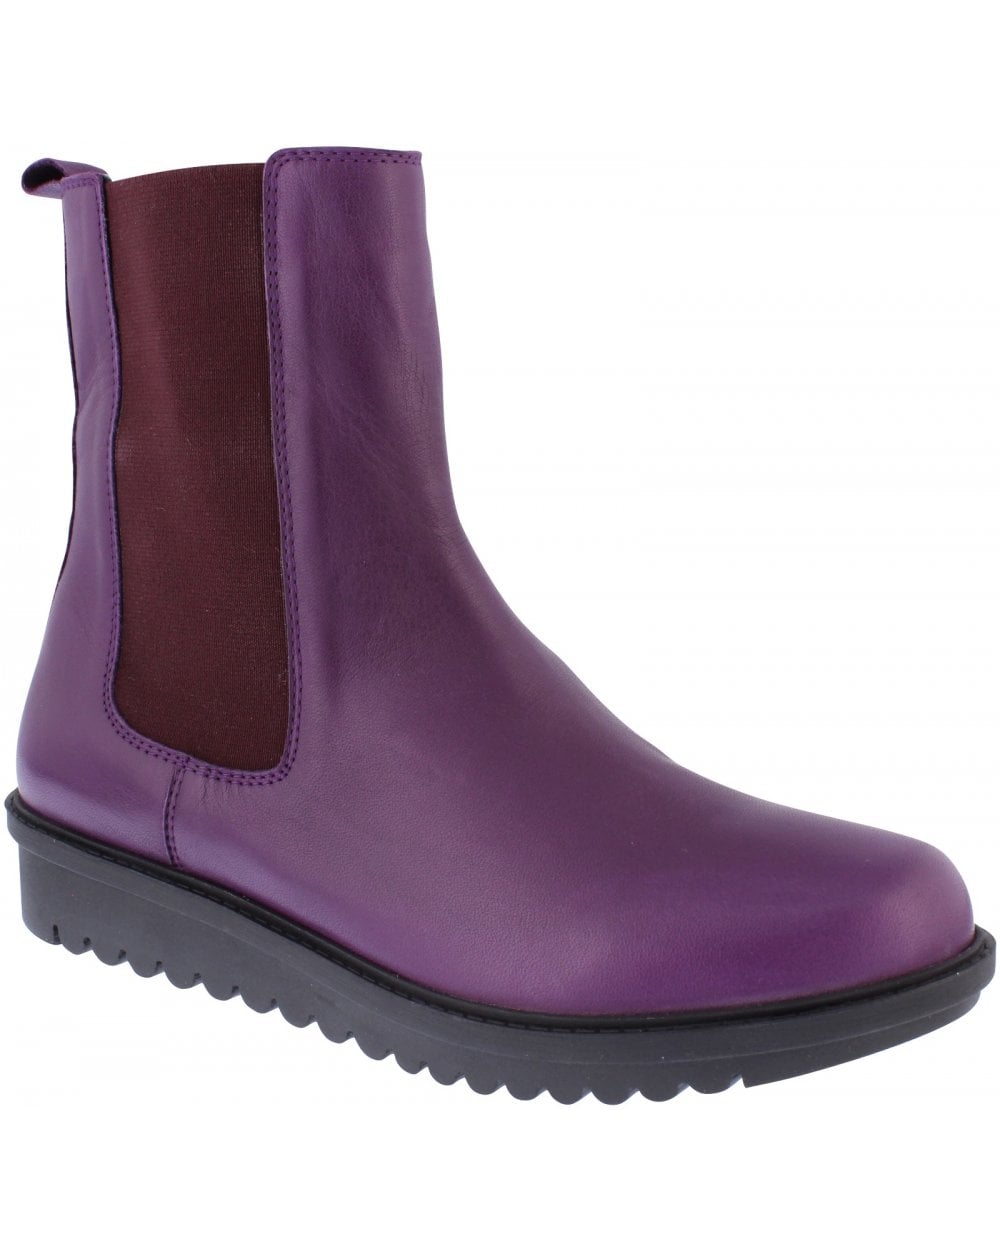 Trudy Ankle Boot - Plum